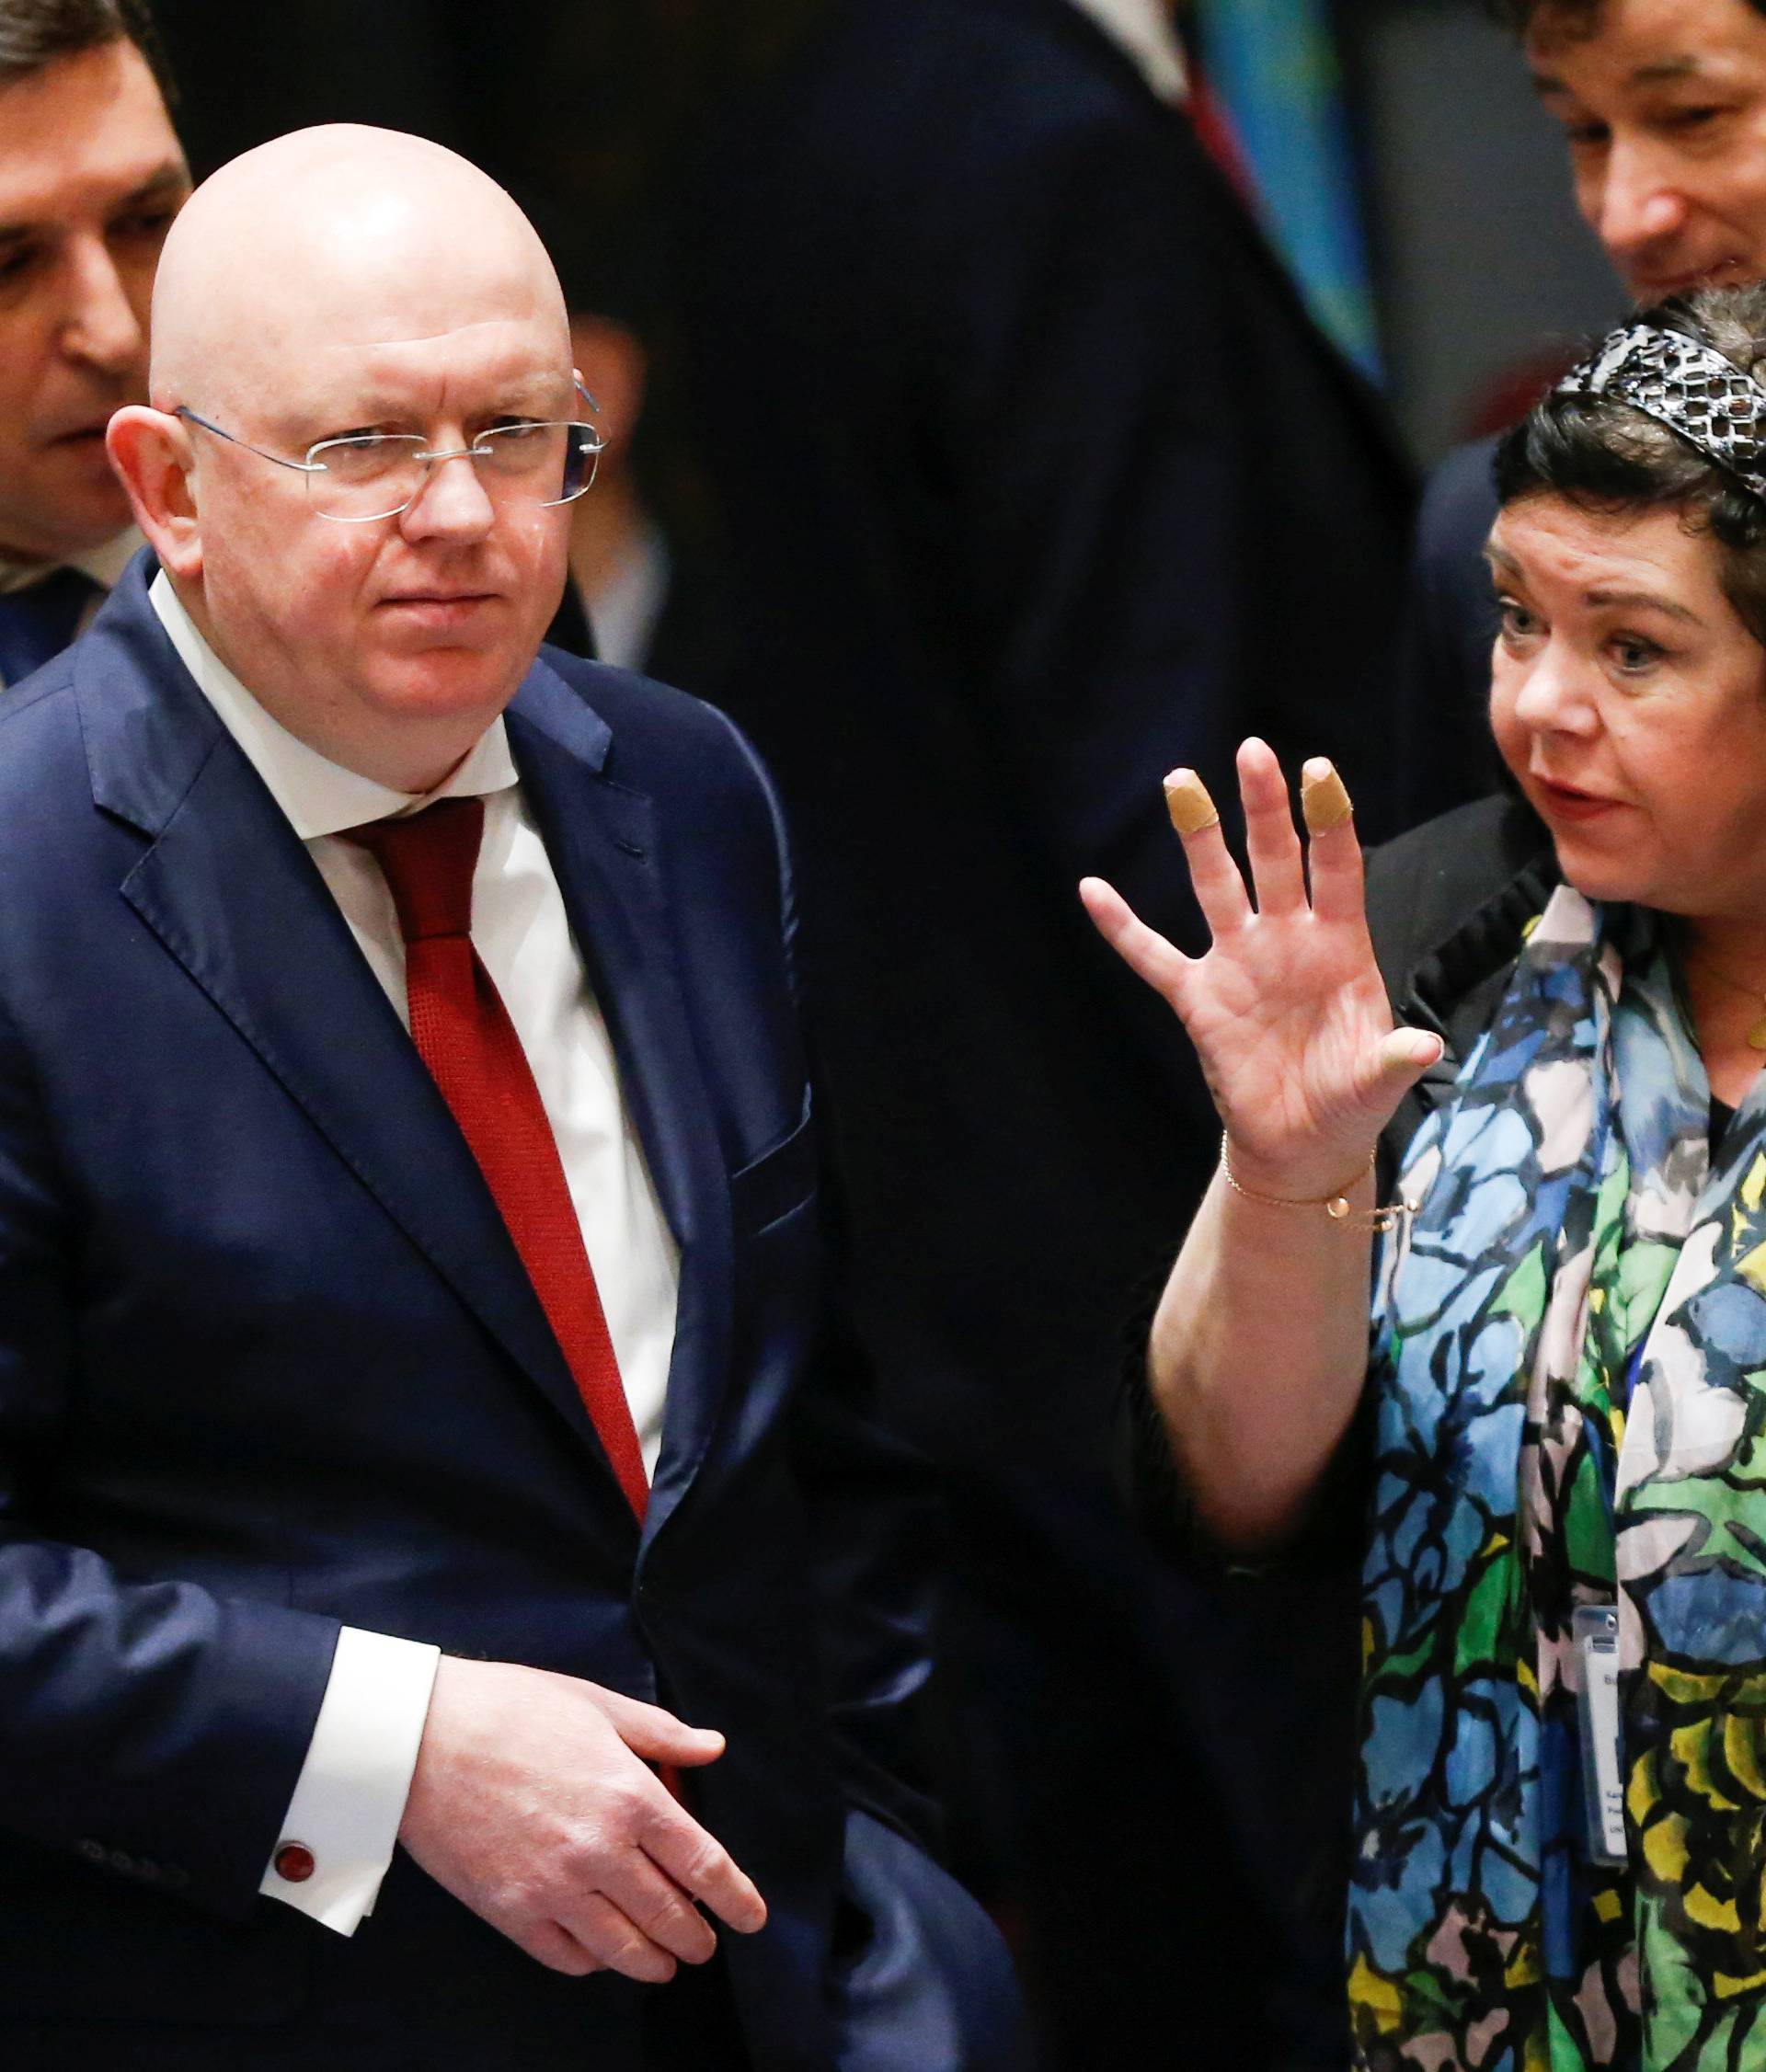 Pierce, UK Ambassador to the United Nations talks with Russian Ambassador to the United Nations Nebenzya before the emergency United Nations Security Council meeting on Syria at the U.N. headquarters in New York